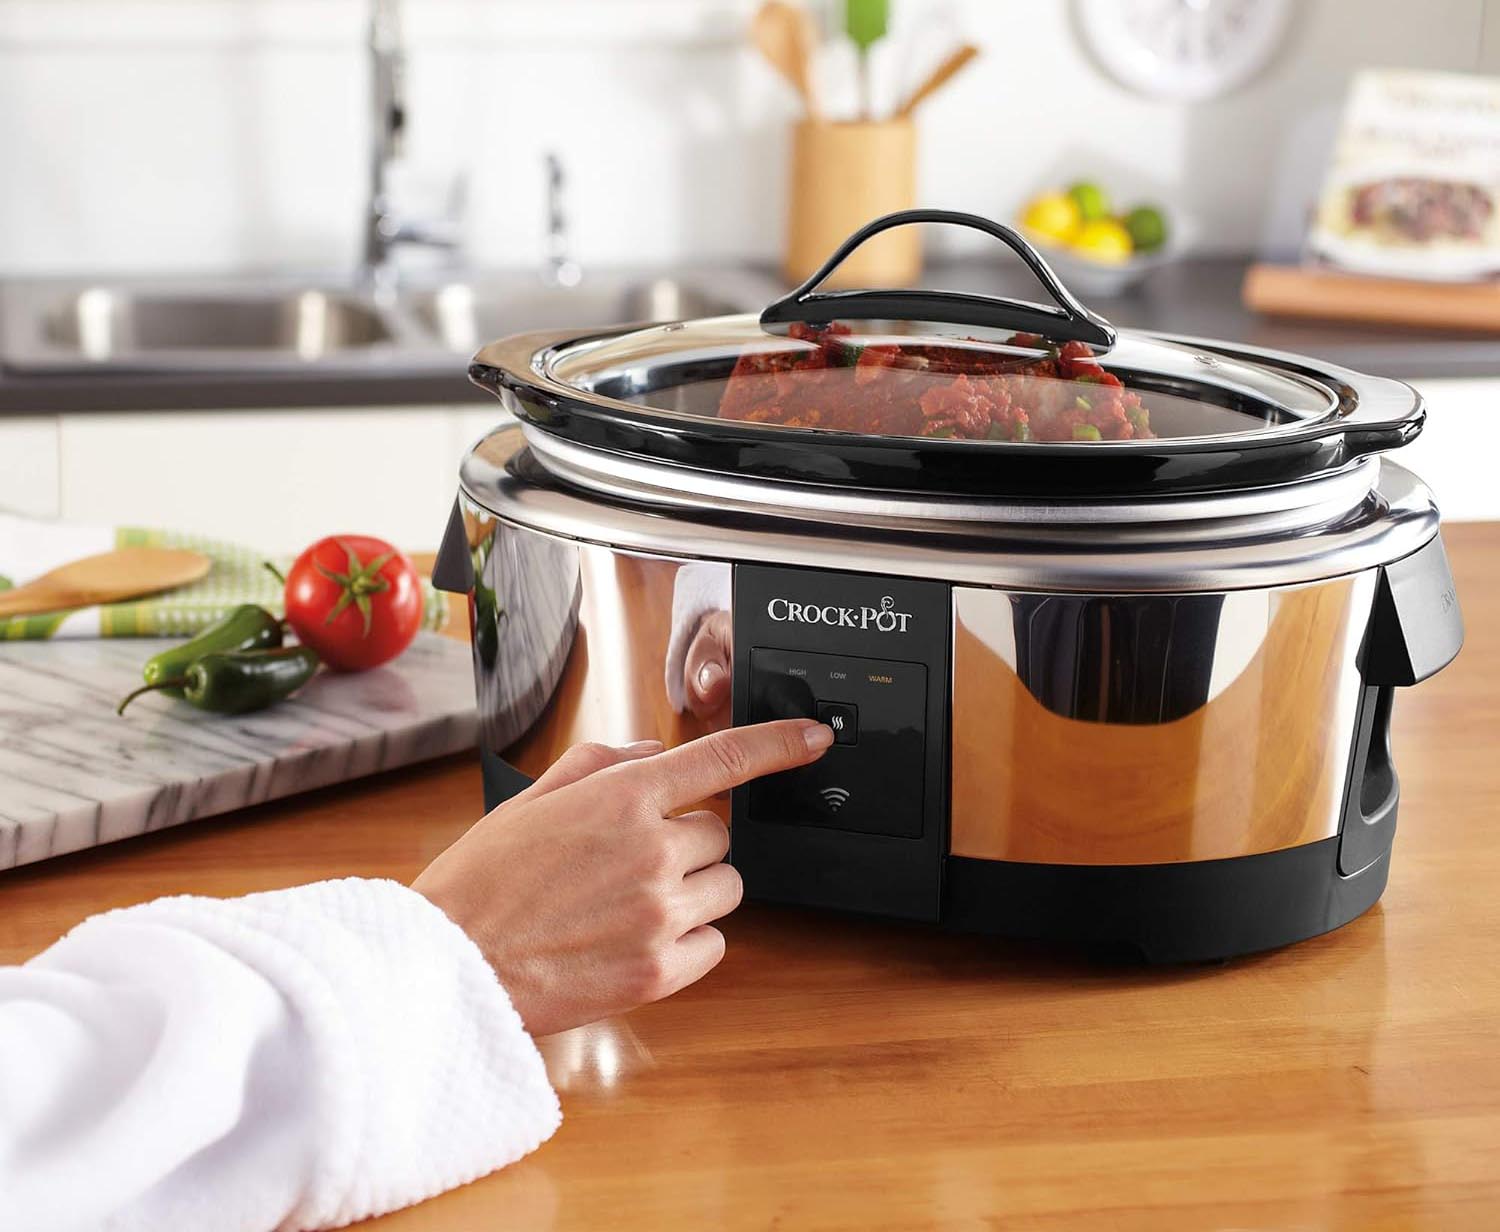 The Most Useful Gadgets for the Home Option Crock-Pot 6-Quart Programmable Slow Cooker